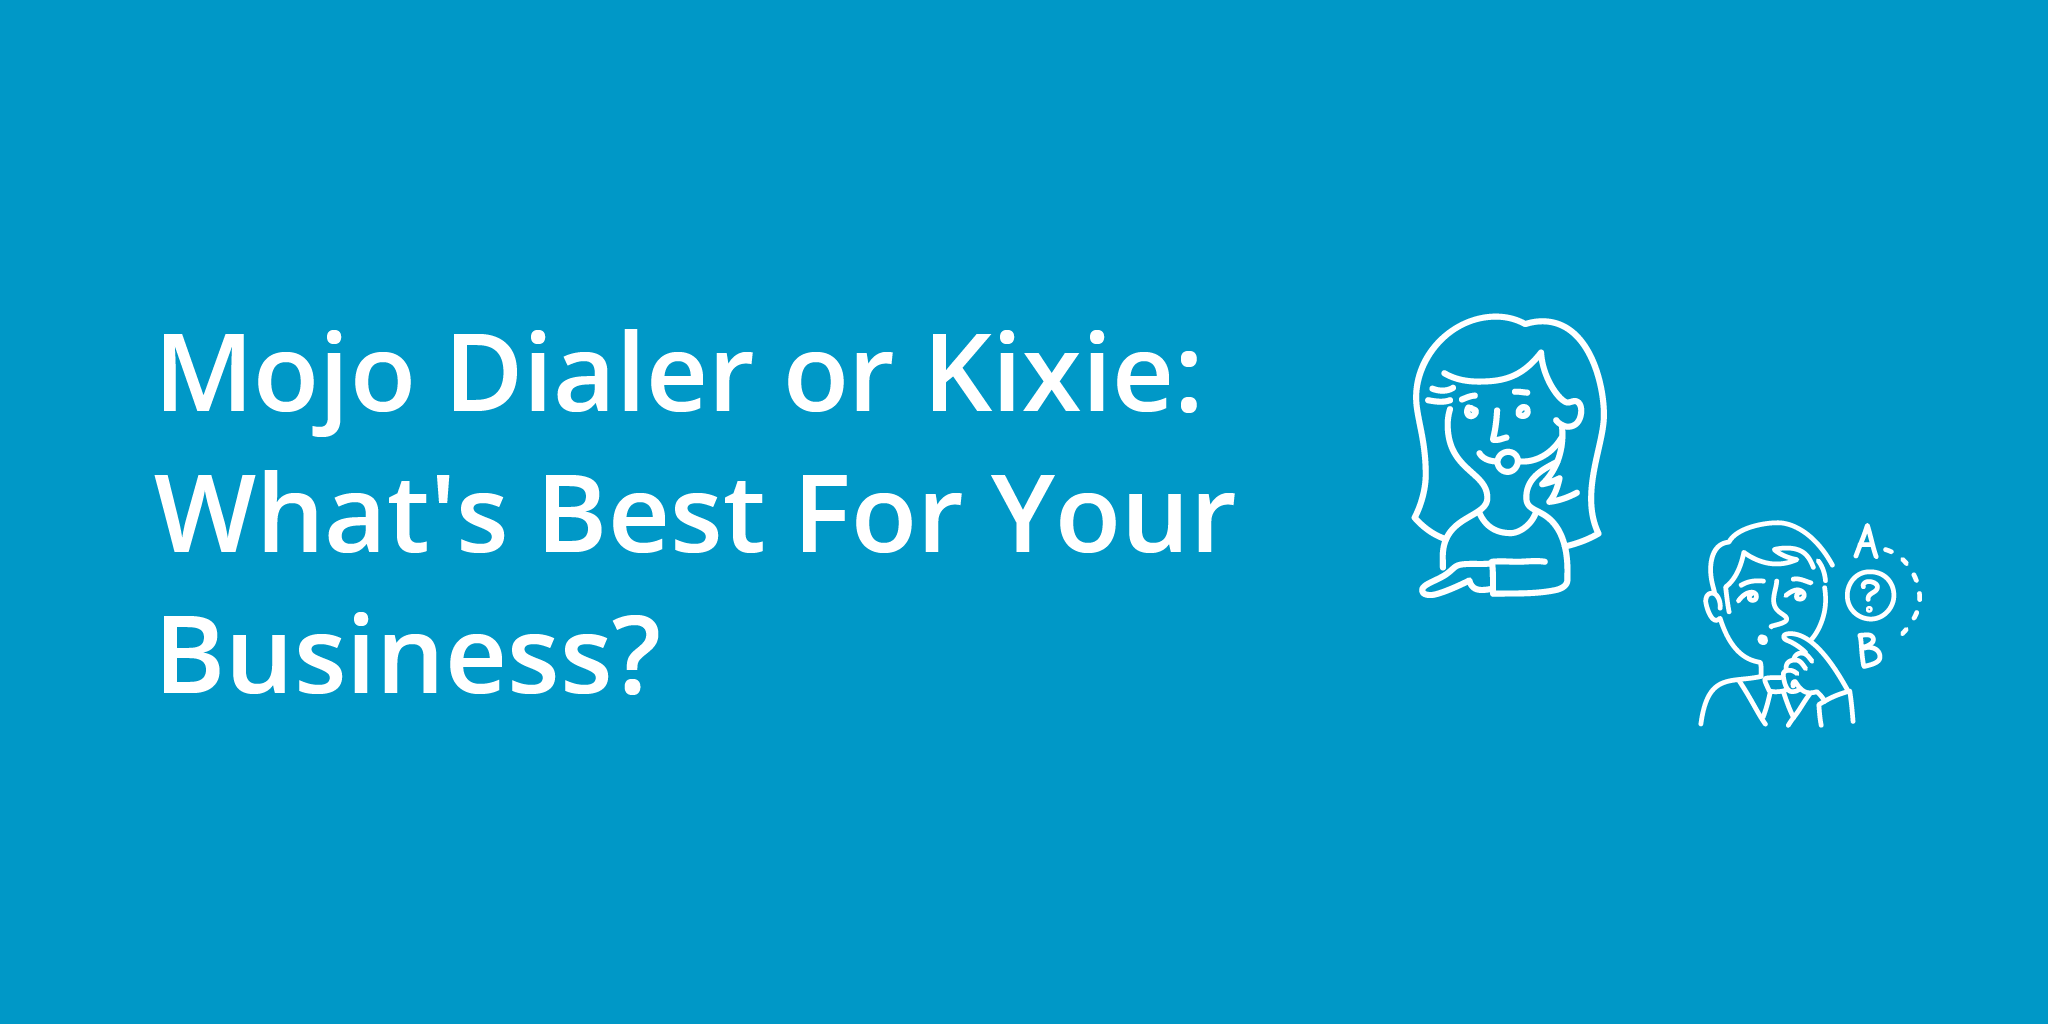 Mojo Dialer or Kixie: What's Best For Your Business? | Telephones for business